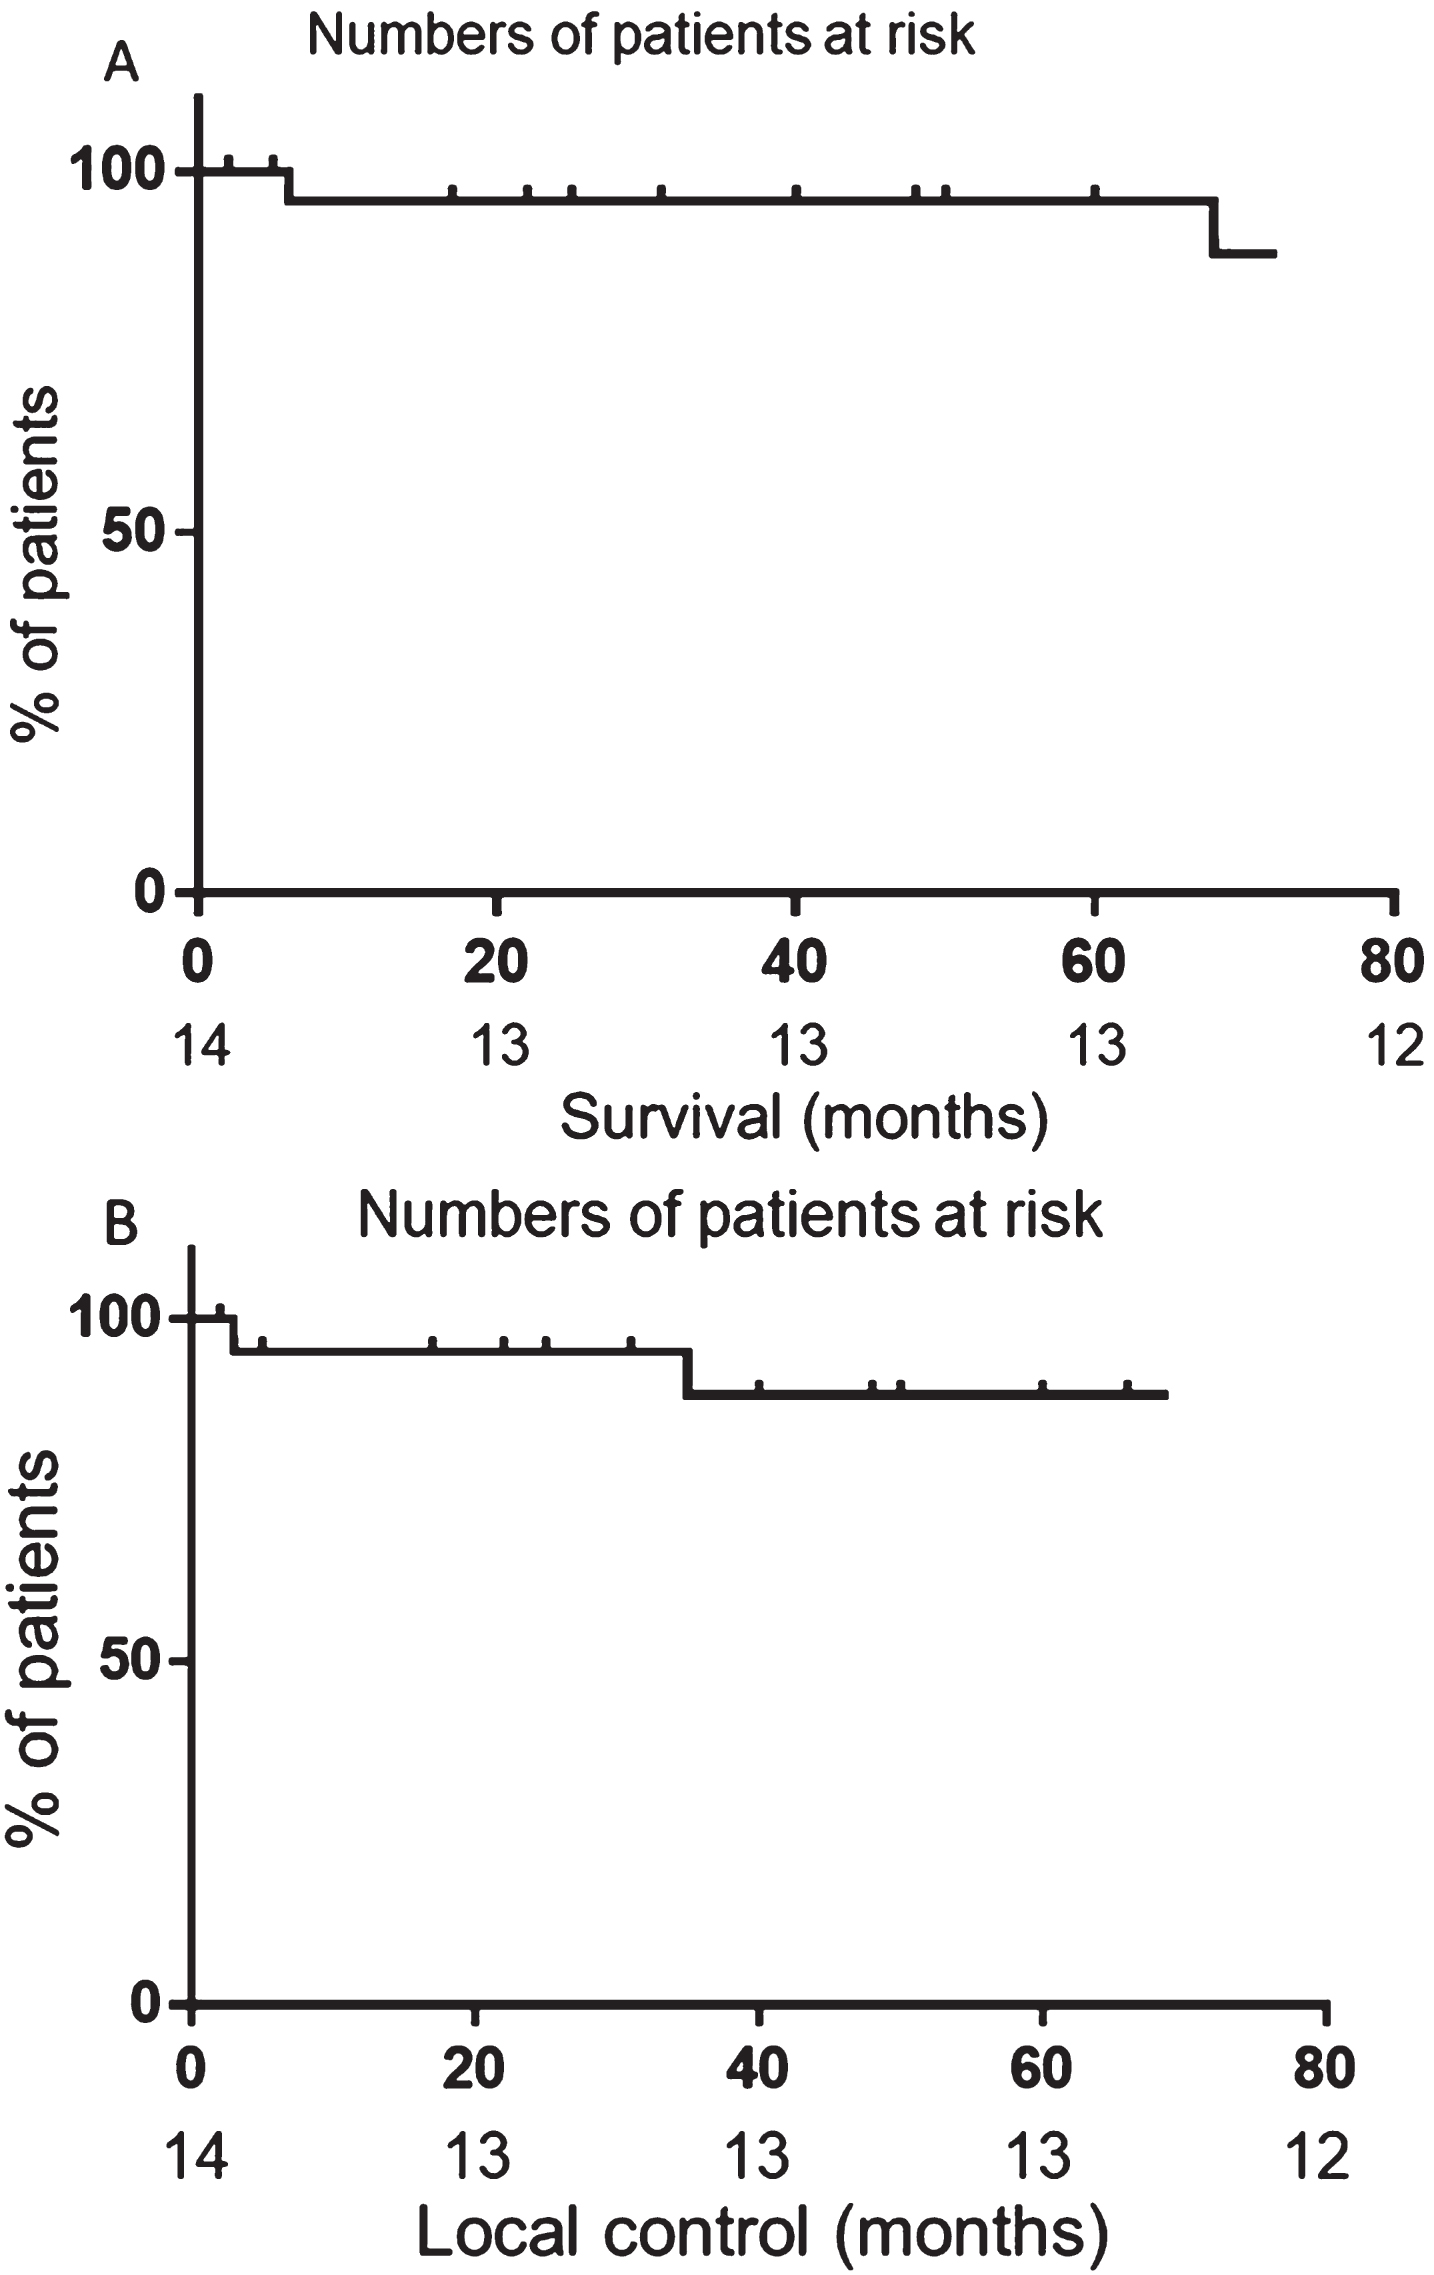 Disease control after radiotherapy. A) Overall survival of patients treated with radiotherapy. B) Local control after treatment with radiotherapy. Censored subjects are noted by a dash on the graphs.